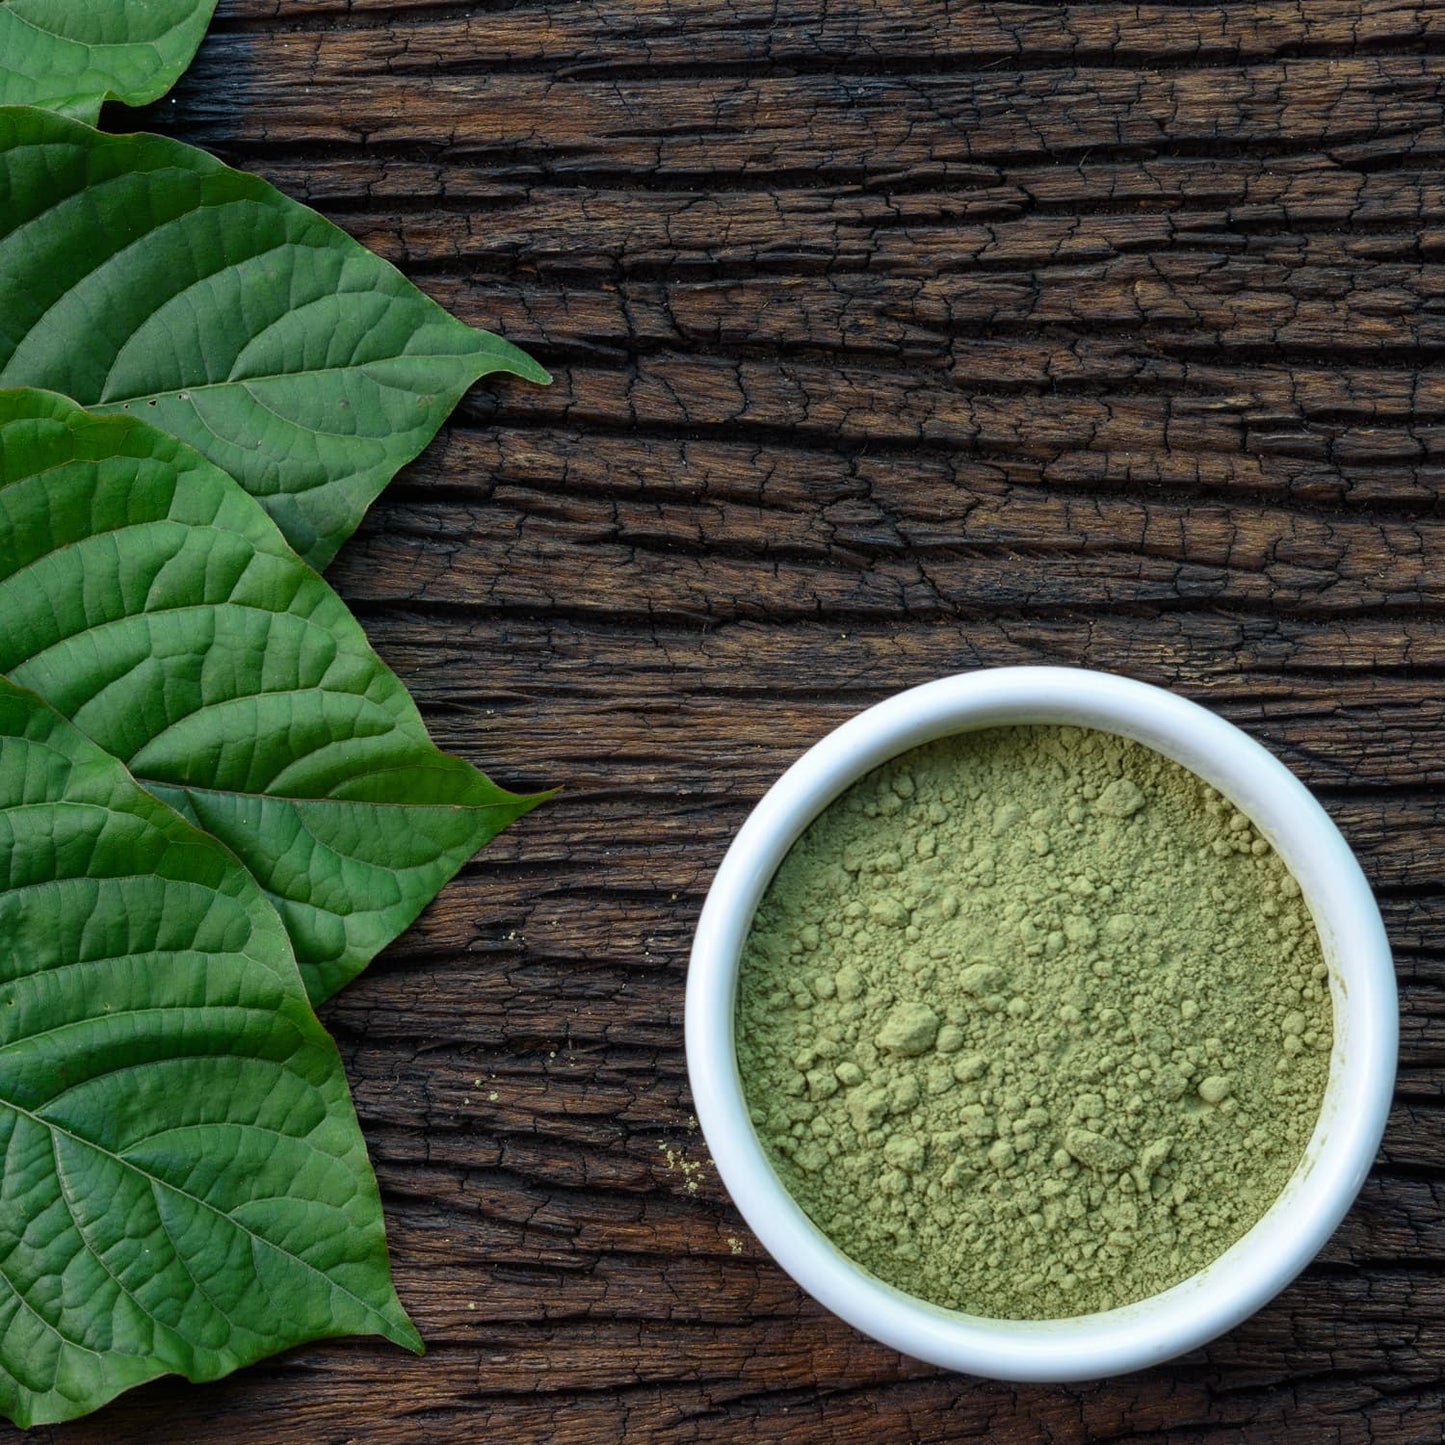 Green vein kratom powder in a bowl on a wooden table